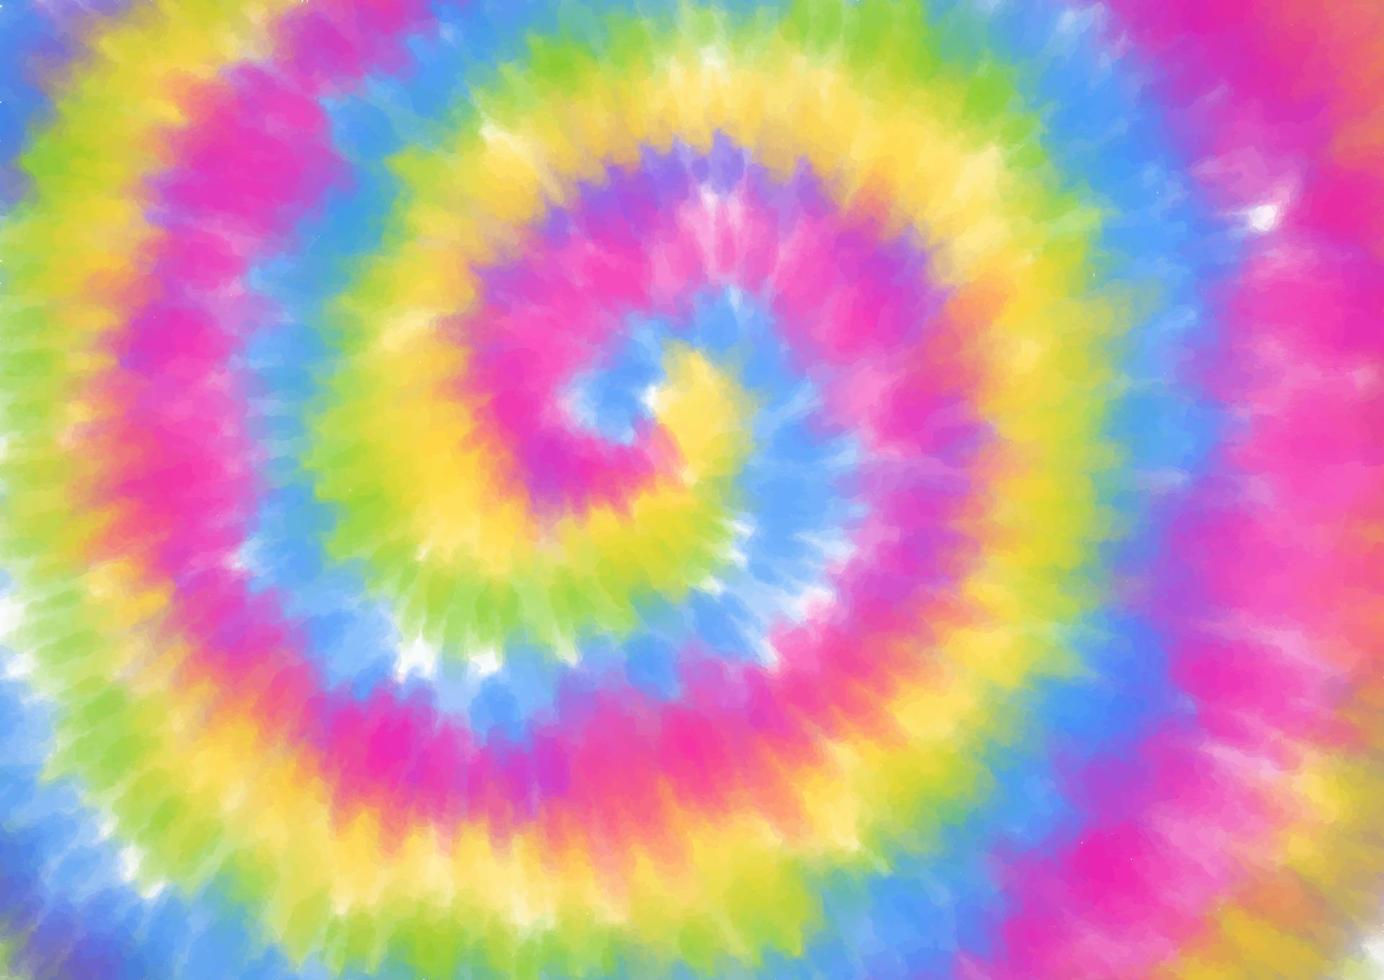 Rainbow coloured abstract tie dye background vector